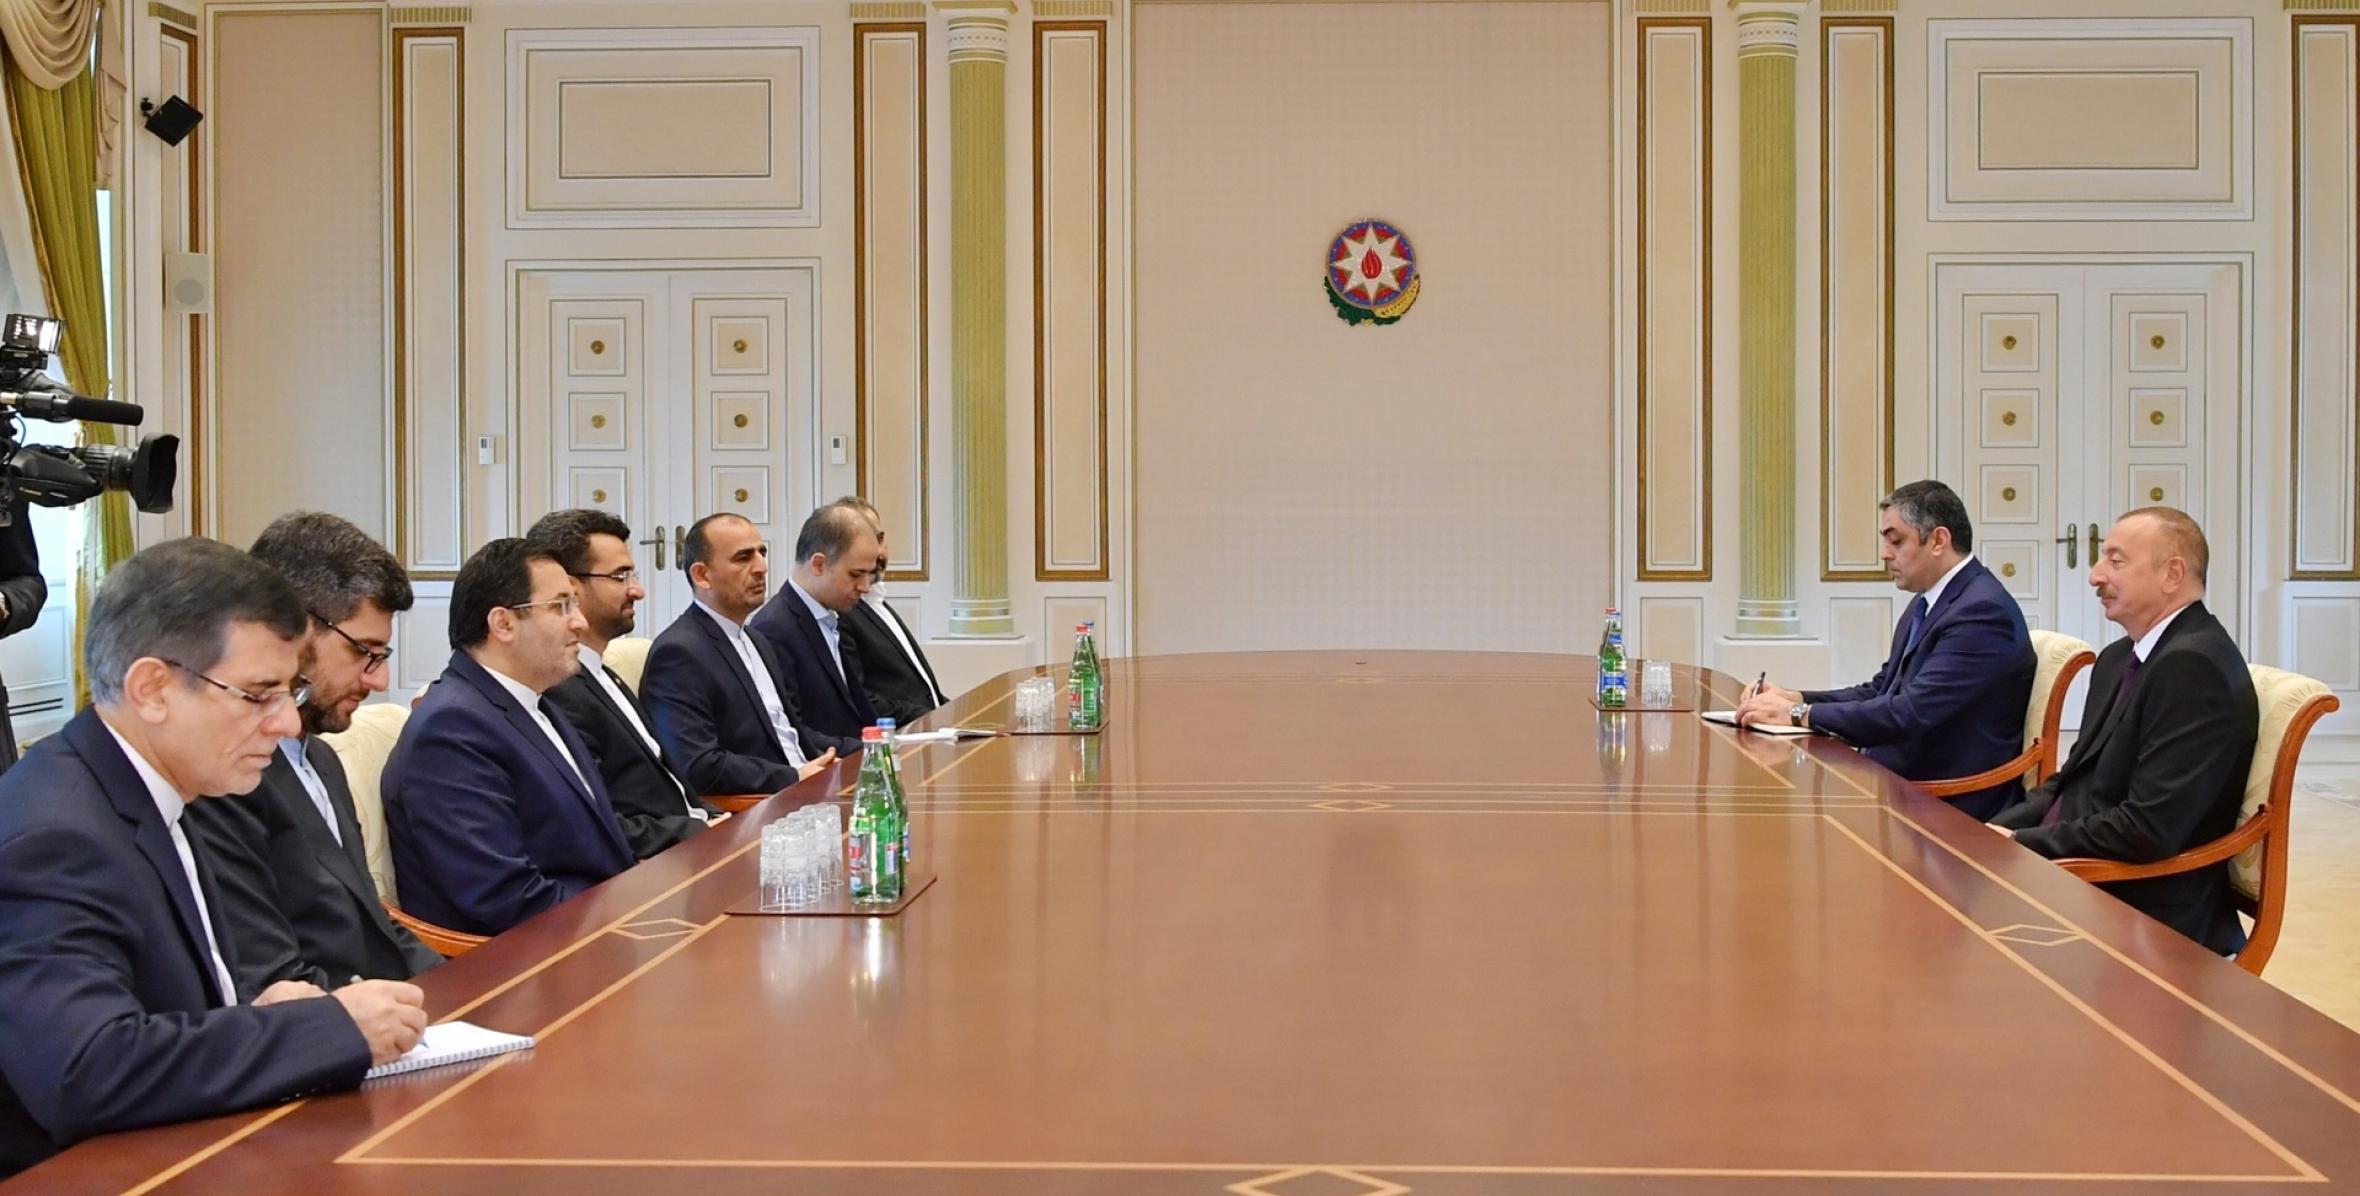 Ilham Aliyev received delegation led by Iranian minister of information and communications technology